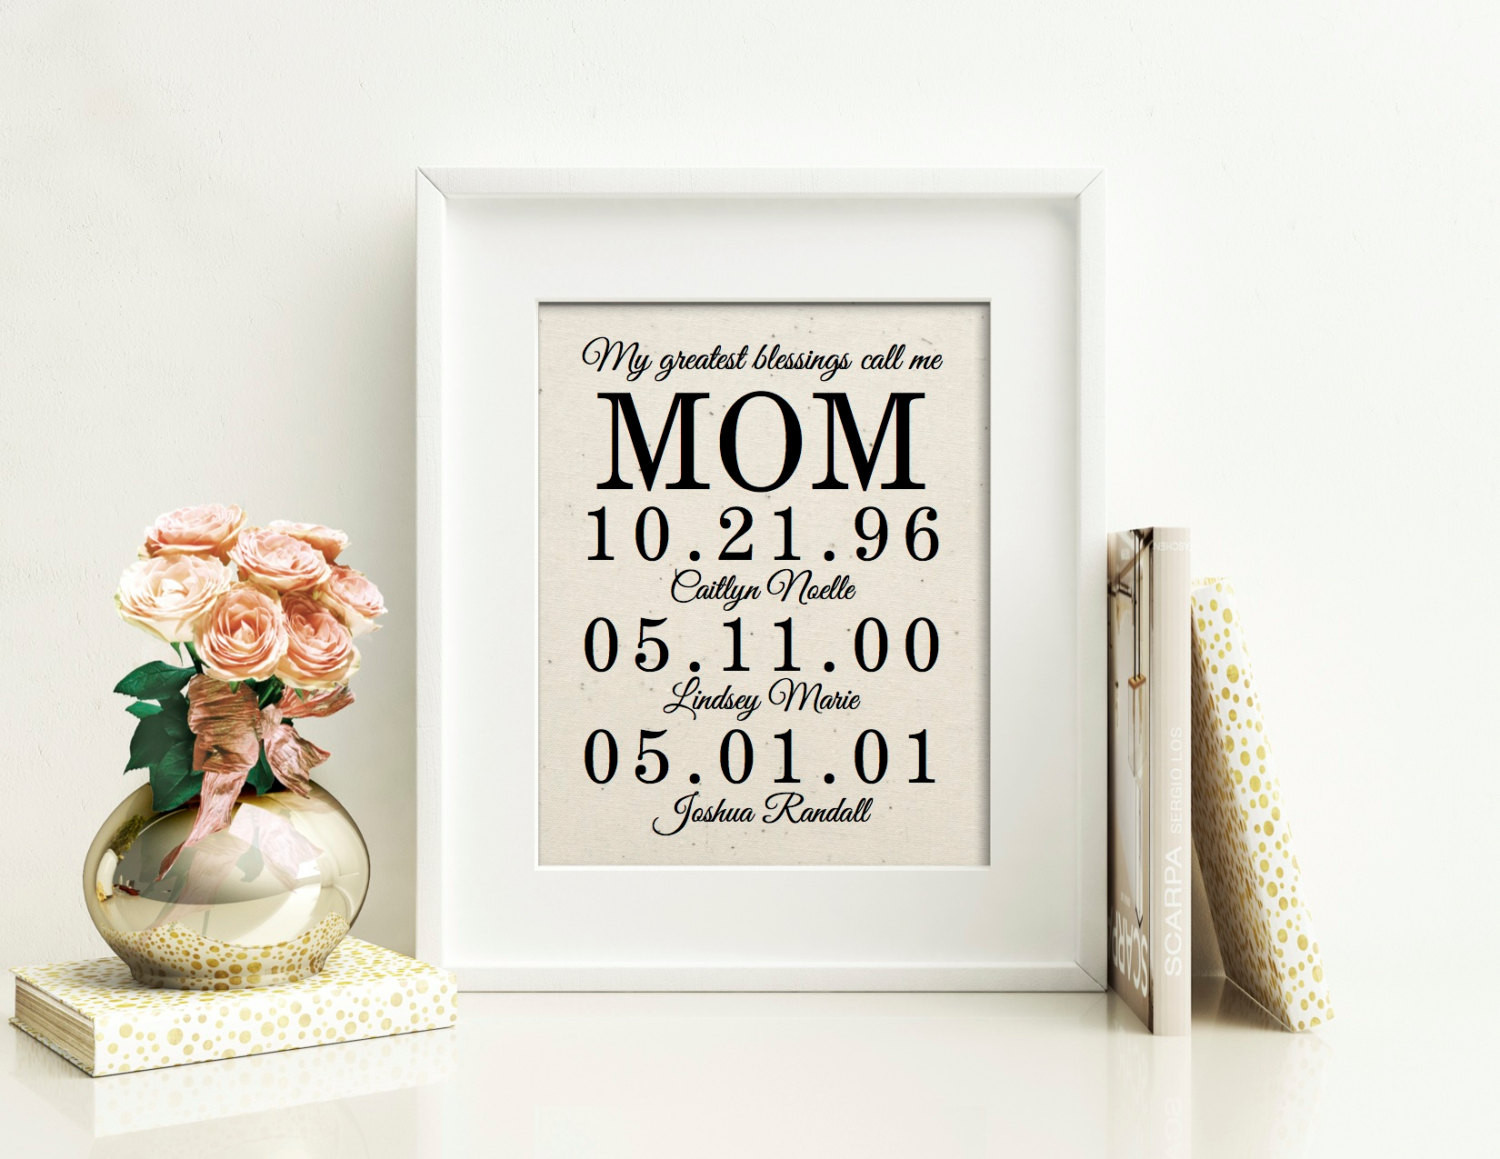 24 Of the Best Ideas for Unique Birthday Gifts for Mom Home, Family